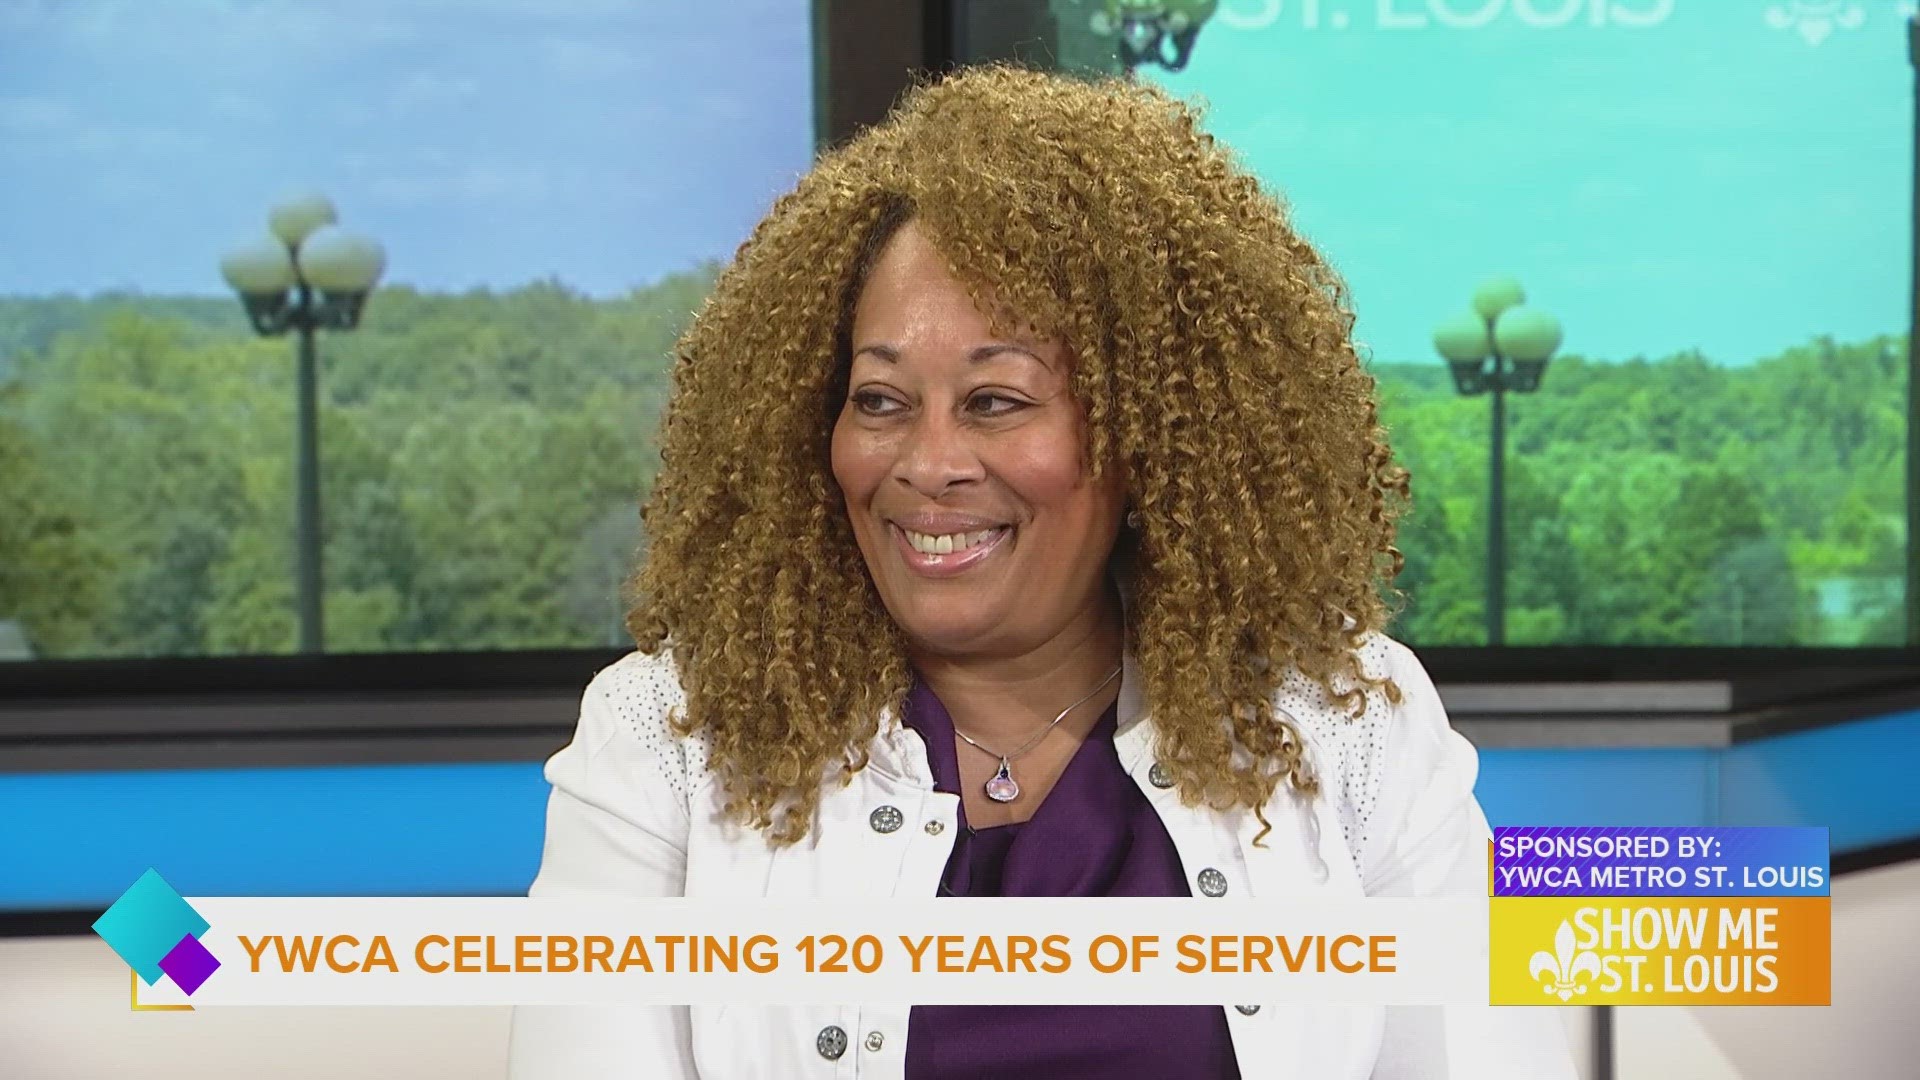 Learn about YWCA's amazing work and celebrate their milestone of providing service for 120 years.